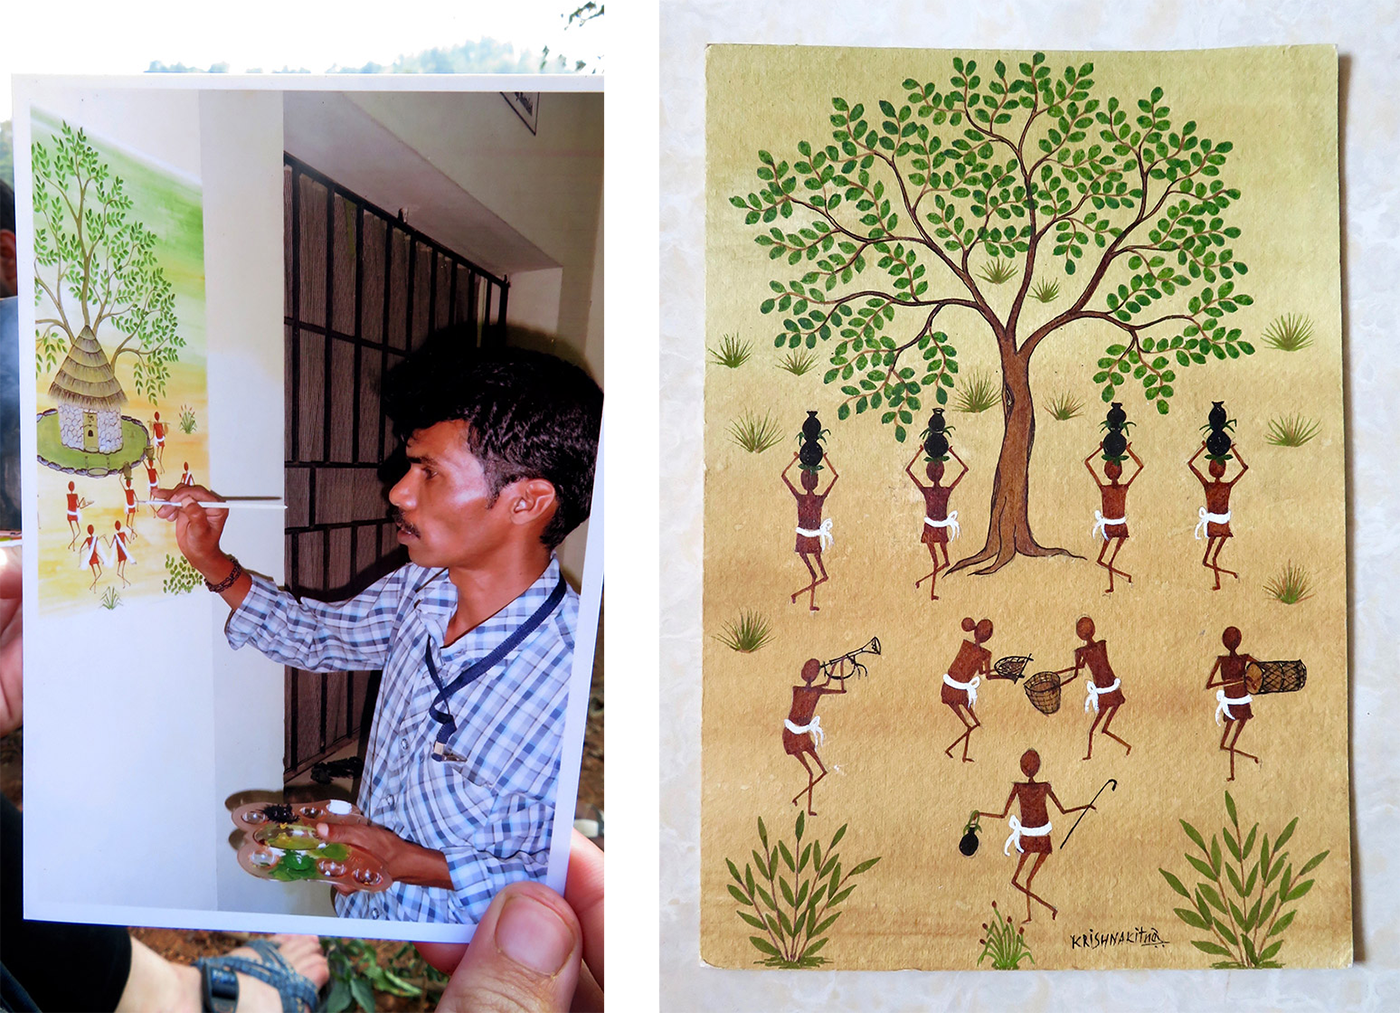 
Left: A photograph of a photo of Krishna while painting. Right: One of his completed artworks